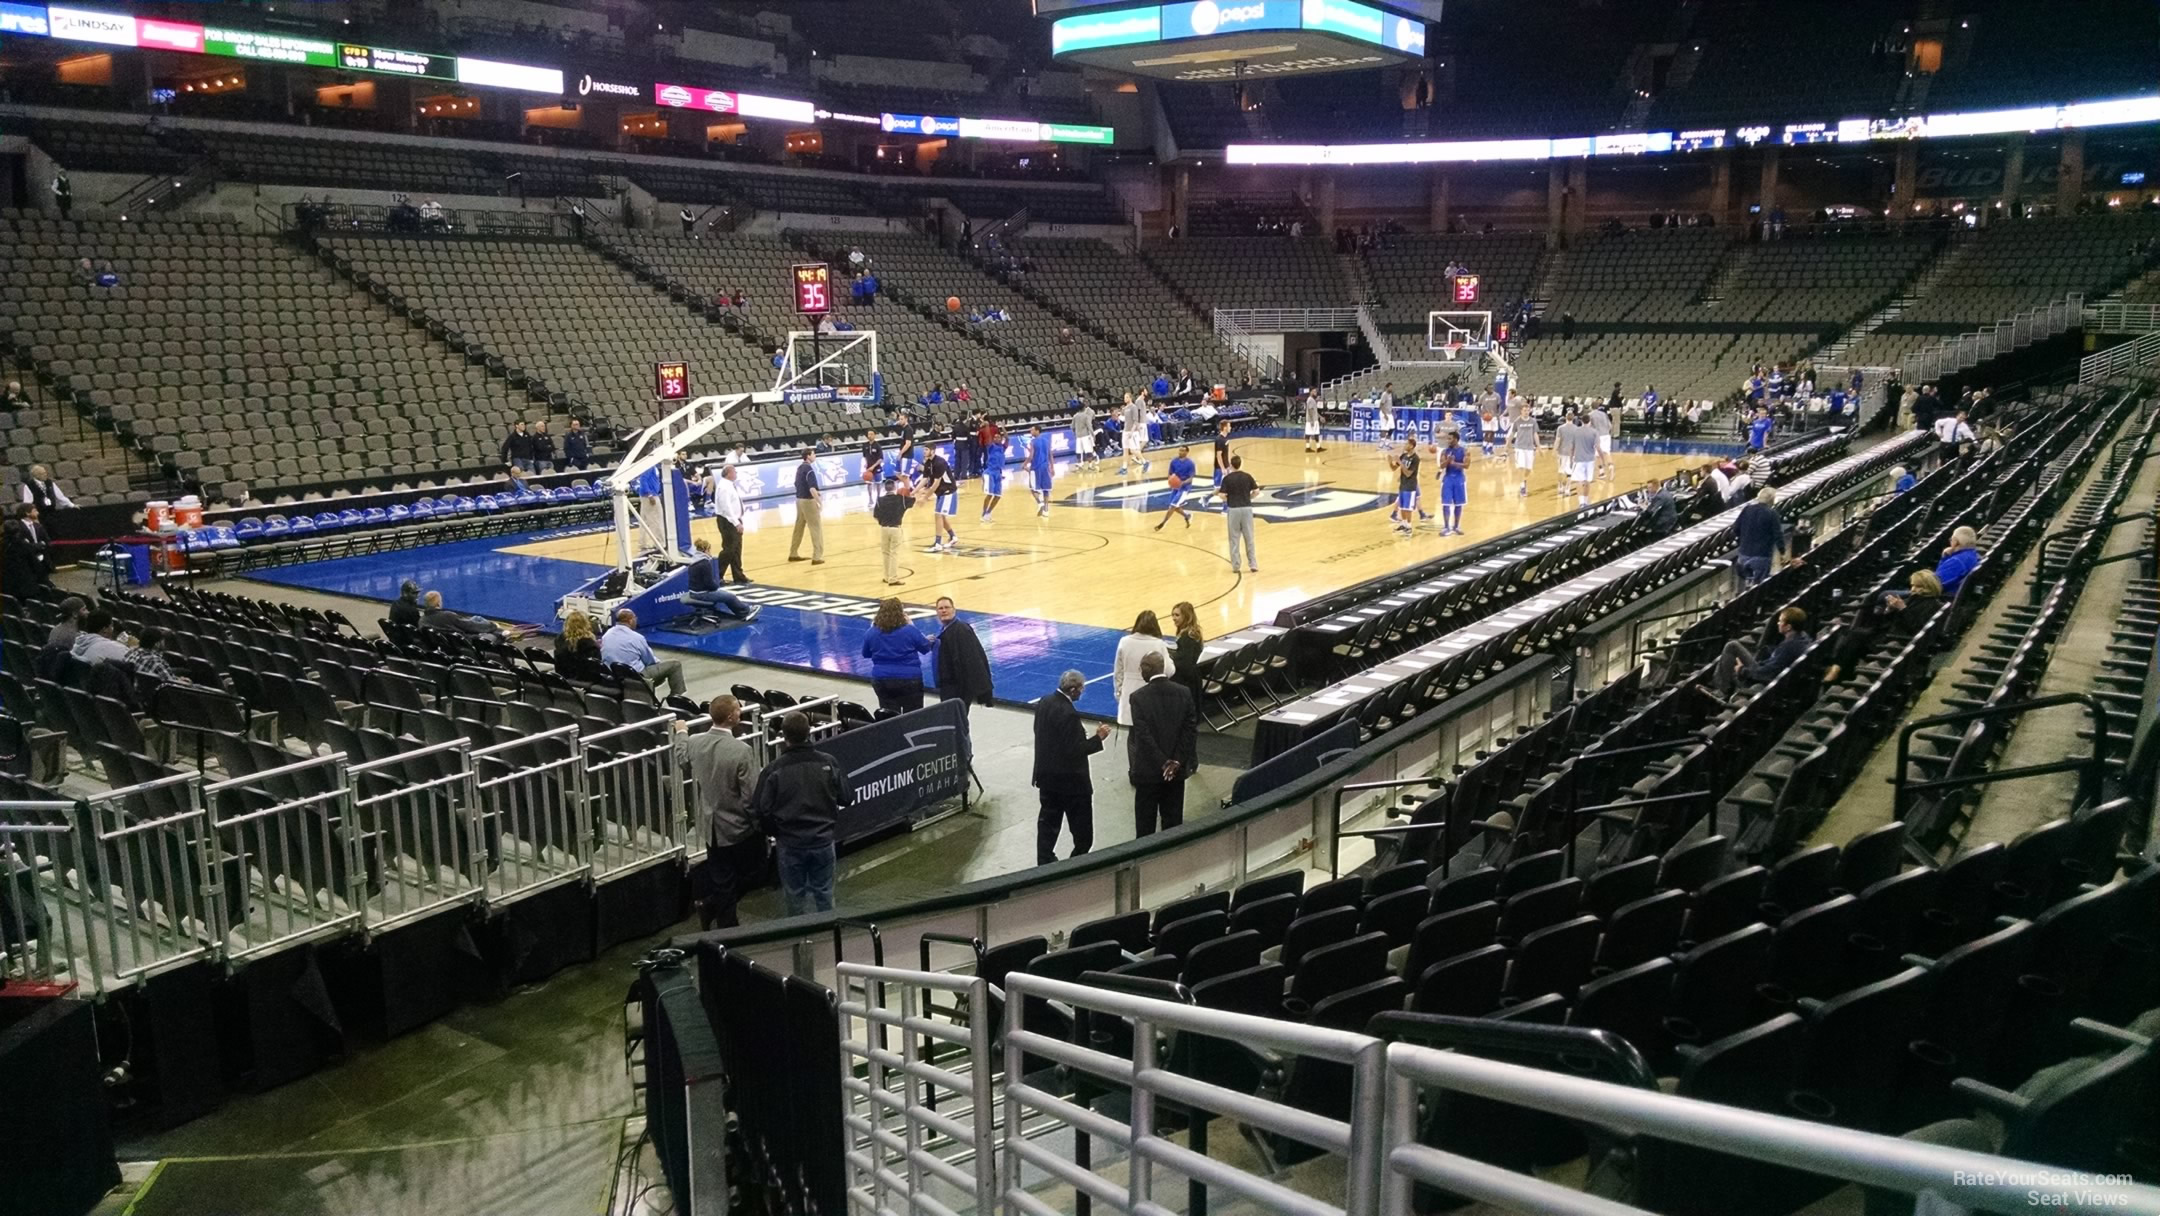 section 110, row 11 seat view  for basketball - chi health center omaha